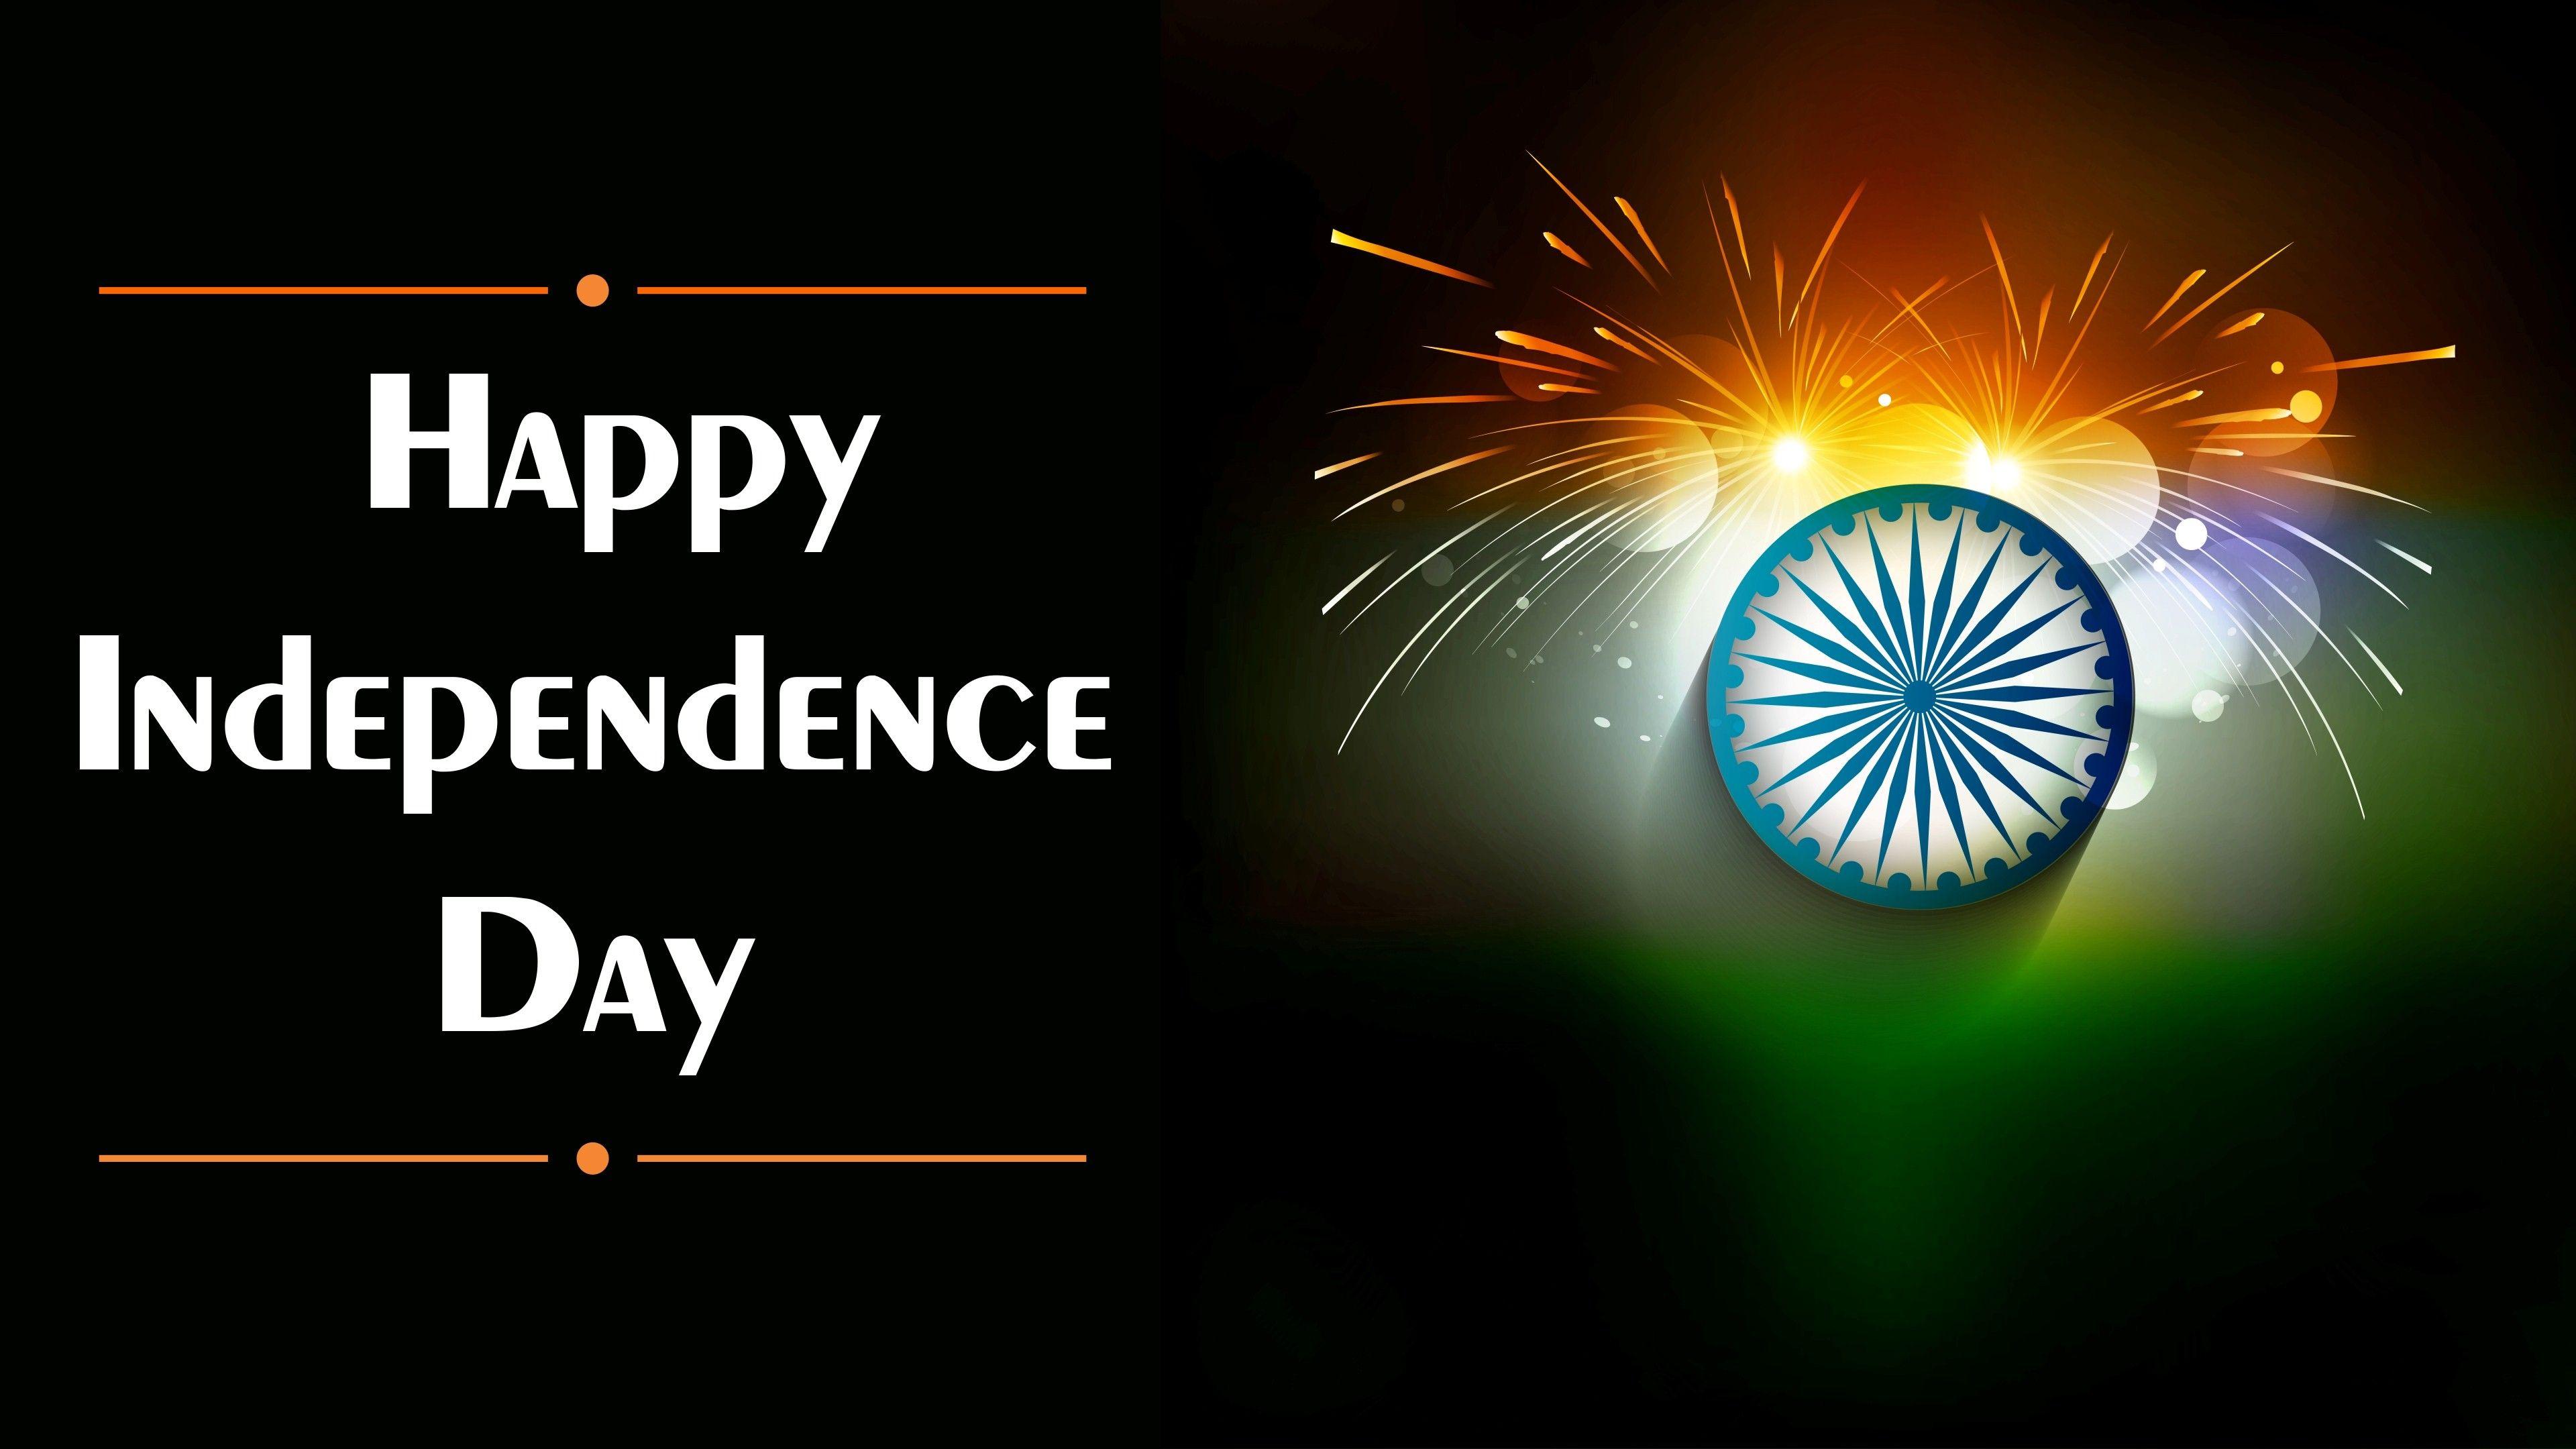 Happy Independence Day of India HD Desktop Wallpaper Background. HD